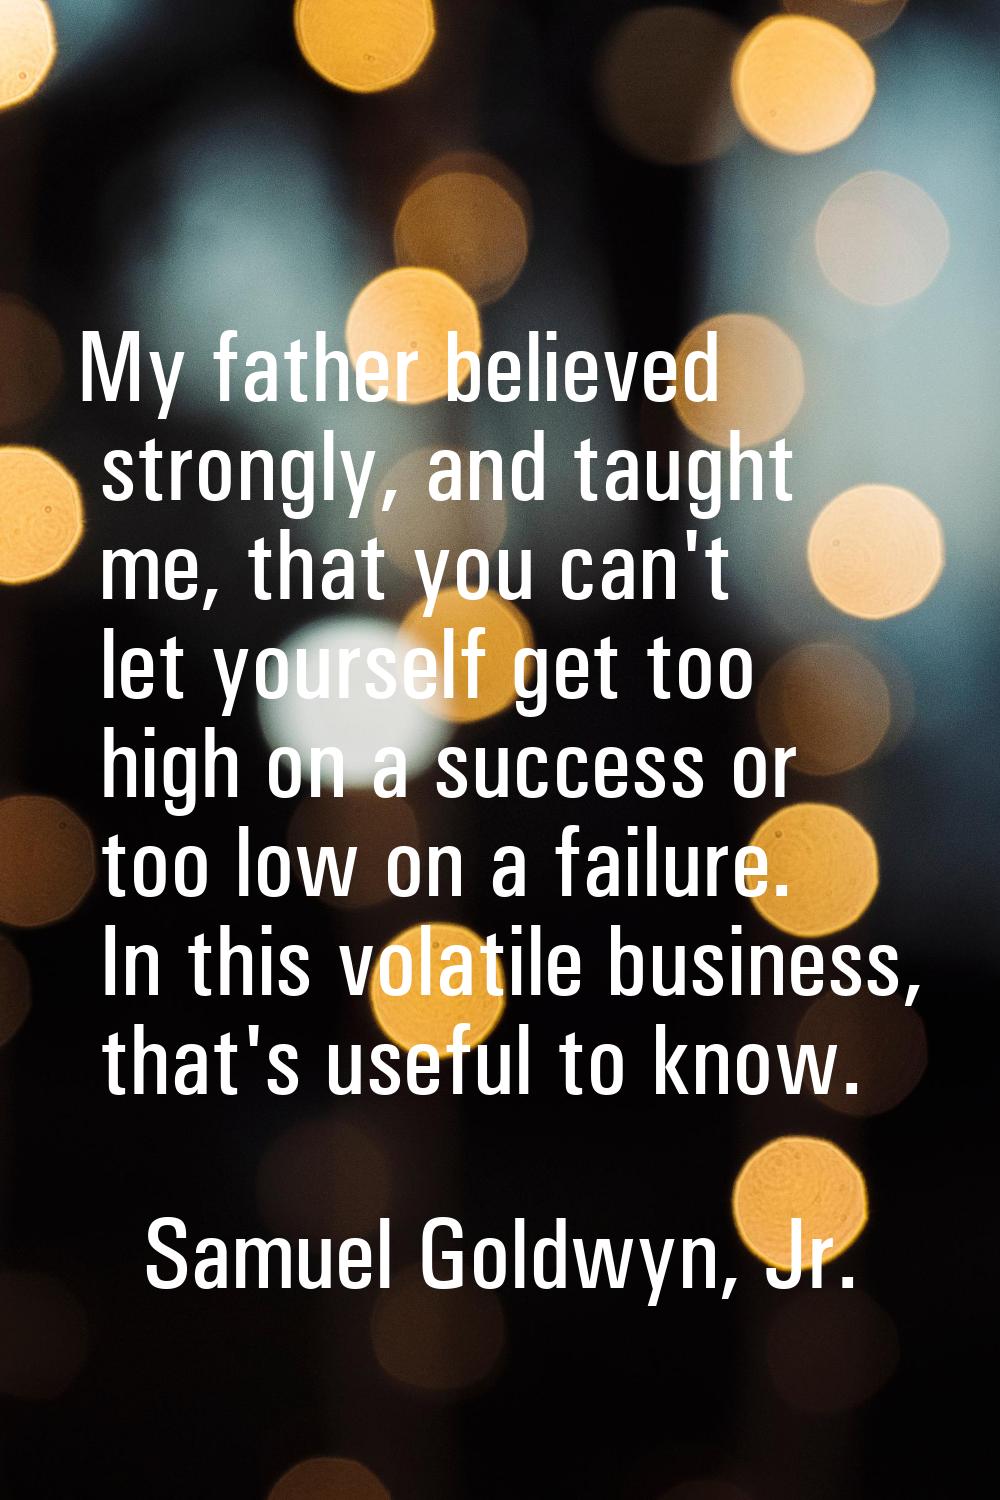 My father believed strongly, and taught me, that you can't let yourself get too high on a success o